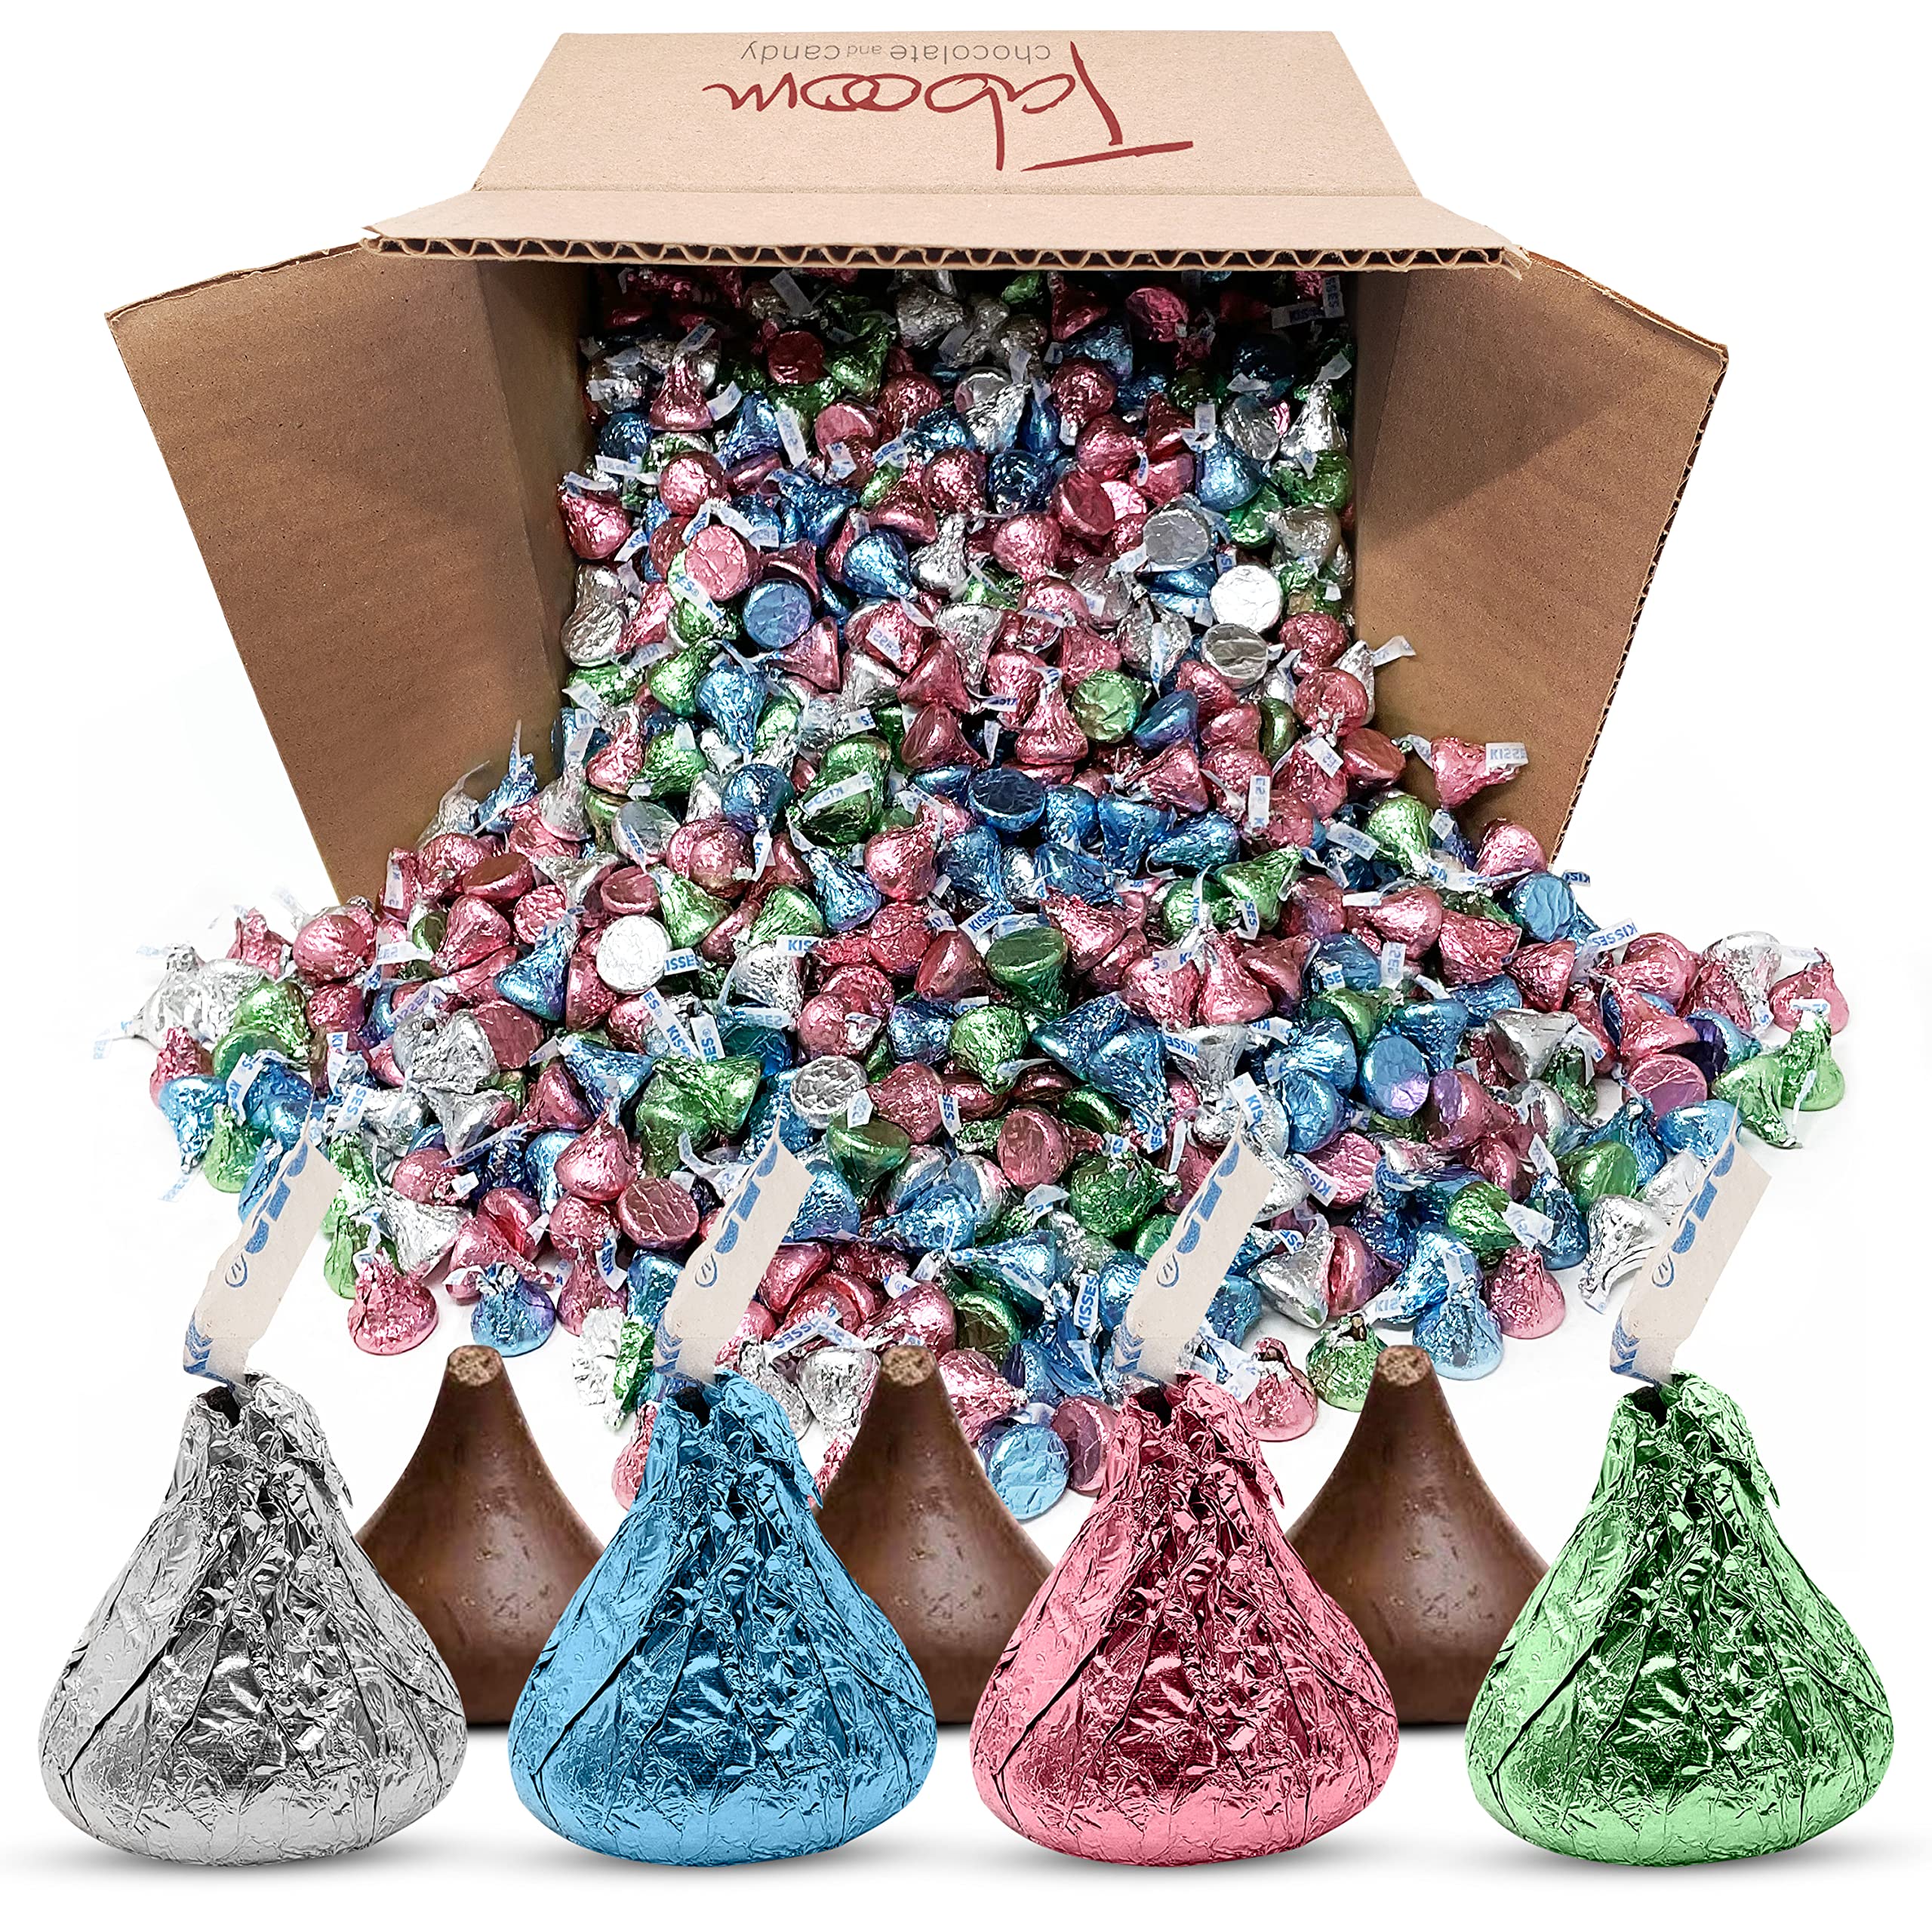 HersheyKisses Bulk Easter Basket Stuffers – 4.2 Pounds Pastel Easter Eggs HersheyMiniatures Assortment – Delicious Milk Chocolate Candy for Office, Kids, Parties, Holiday Easter Treats